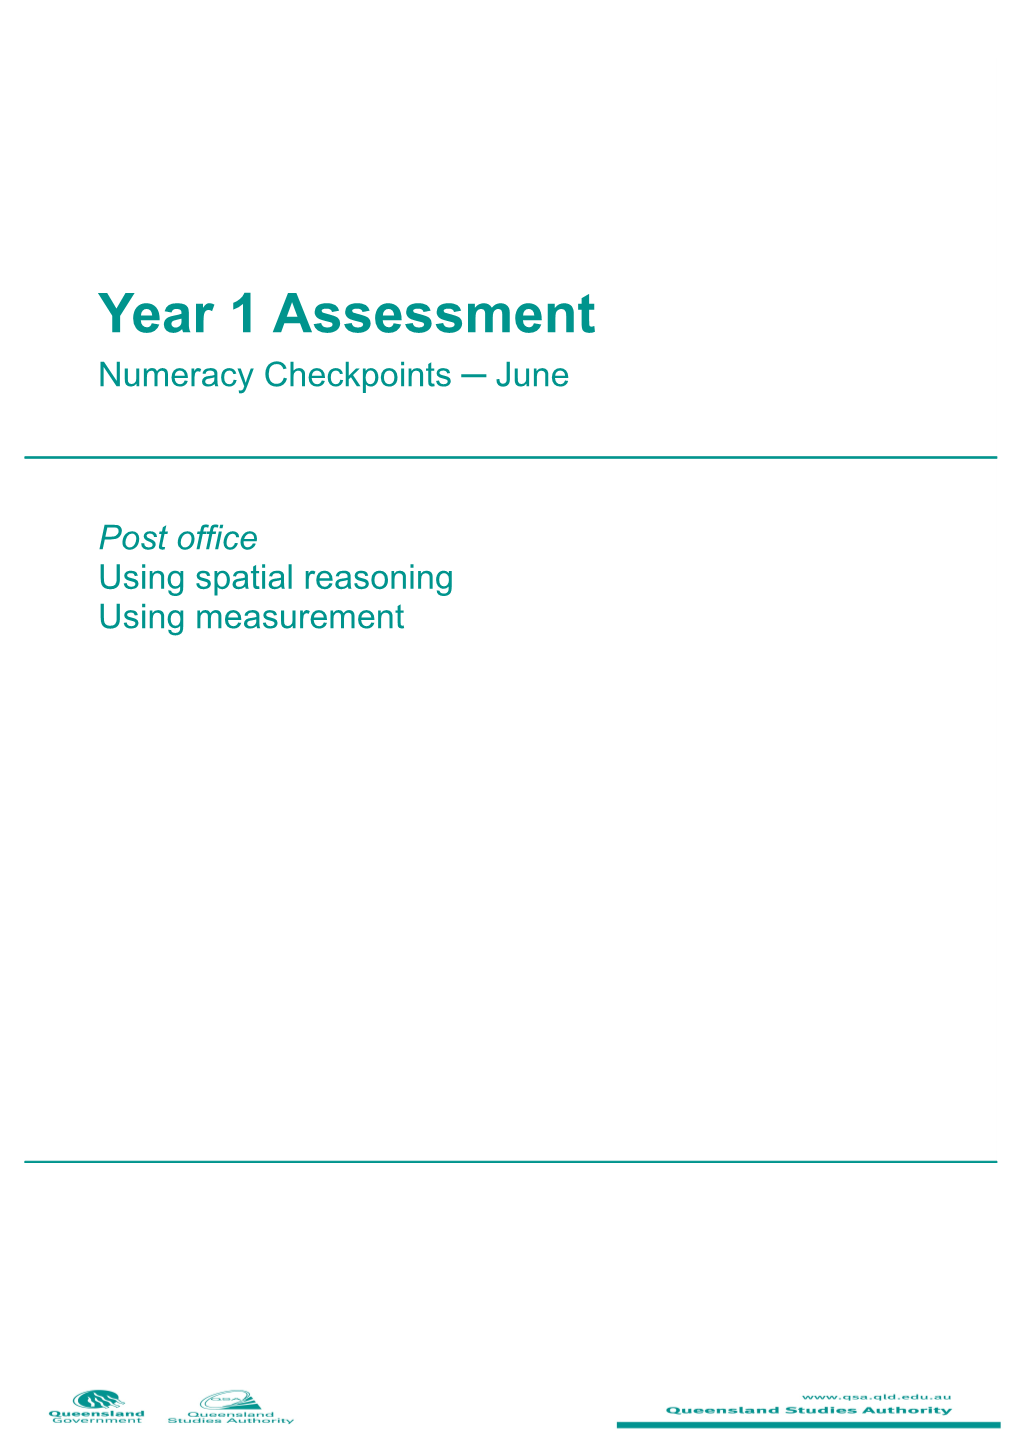 Year 1 Assessment - Numeracy Checkpoints: Post Office - Using Spatial Reasoning, Using